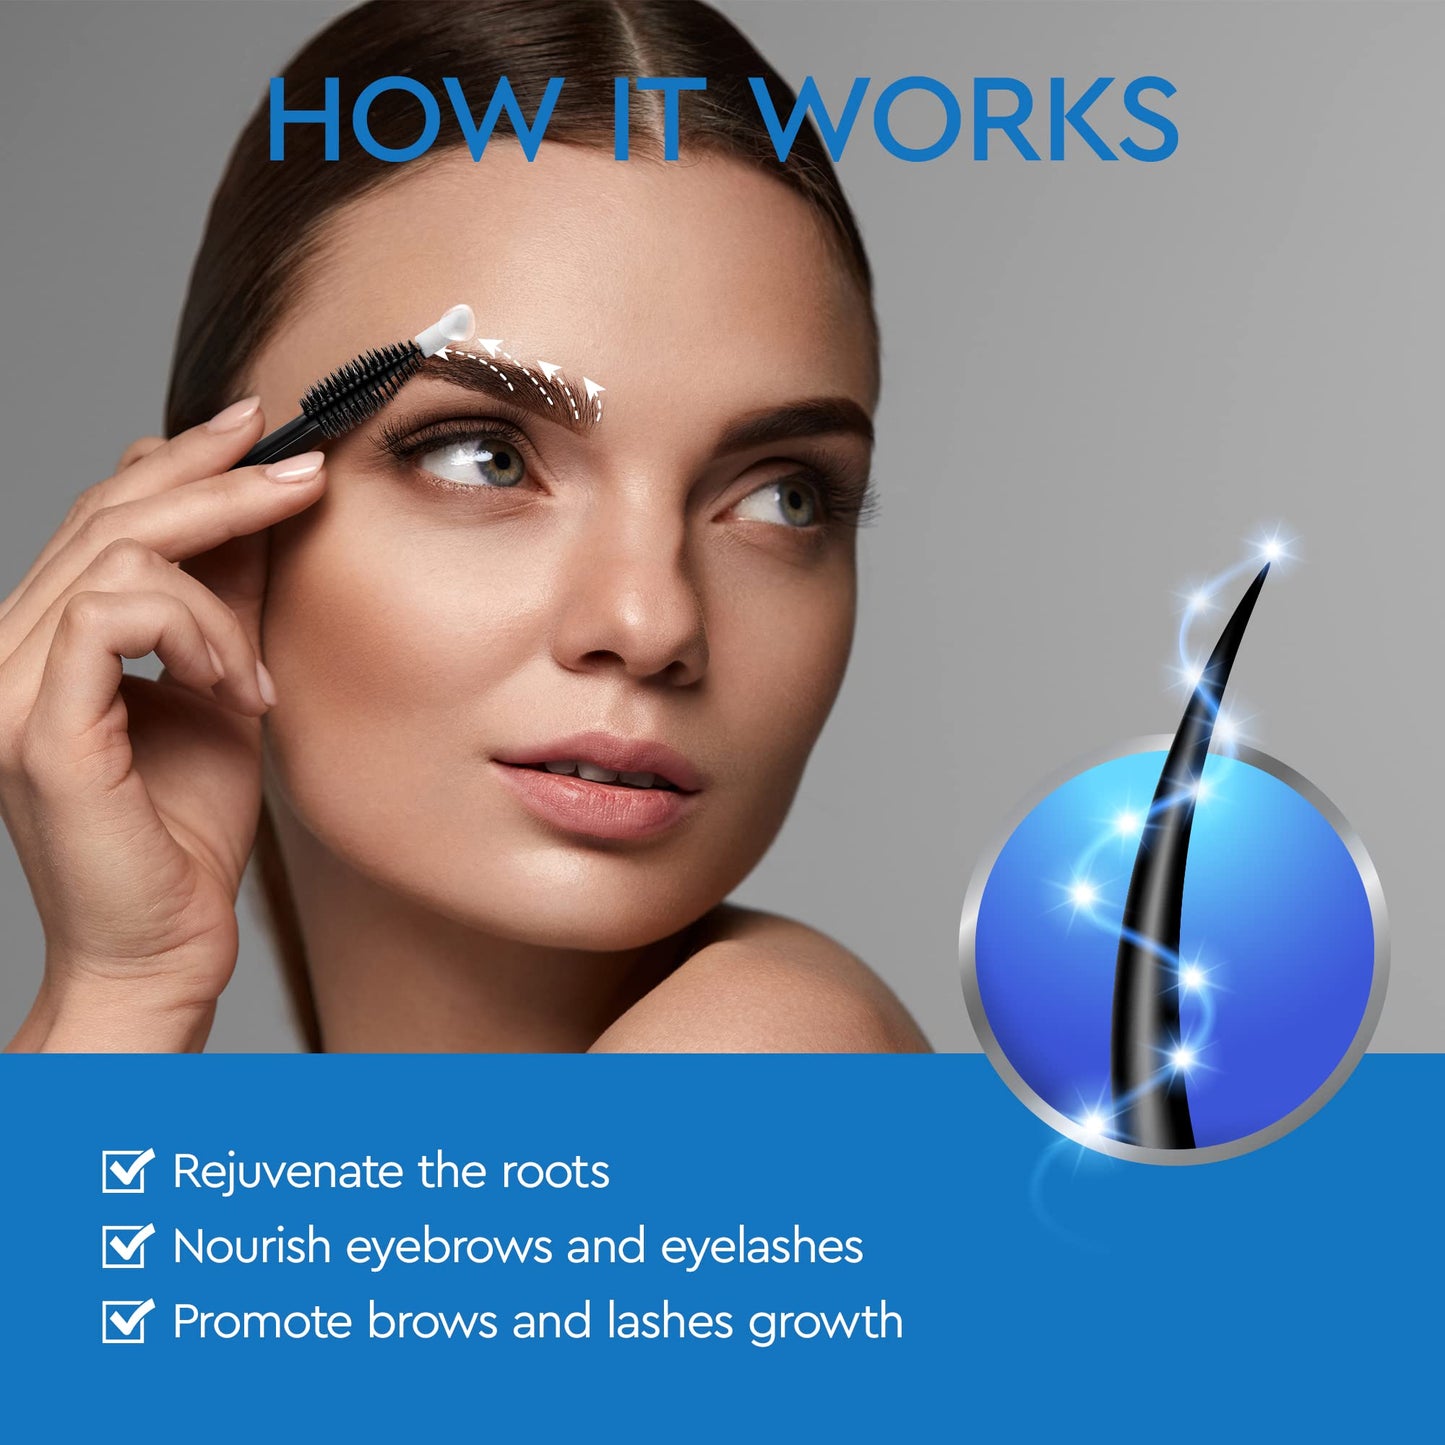 Eyebrow Growth Serum - Natural Eyebrow Serum and Enhancer for Thicker Brows and Grow Bows Faster, Longer, Fuller - 5mL